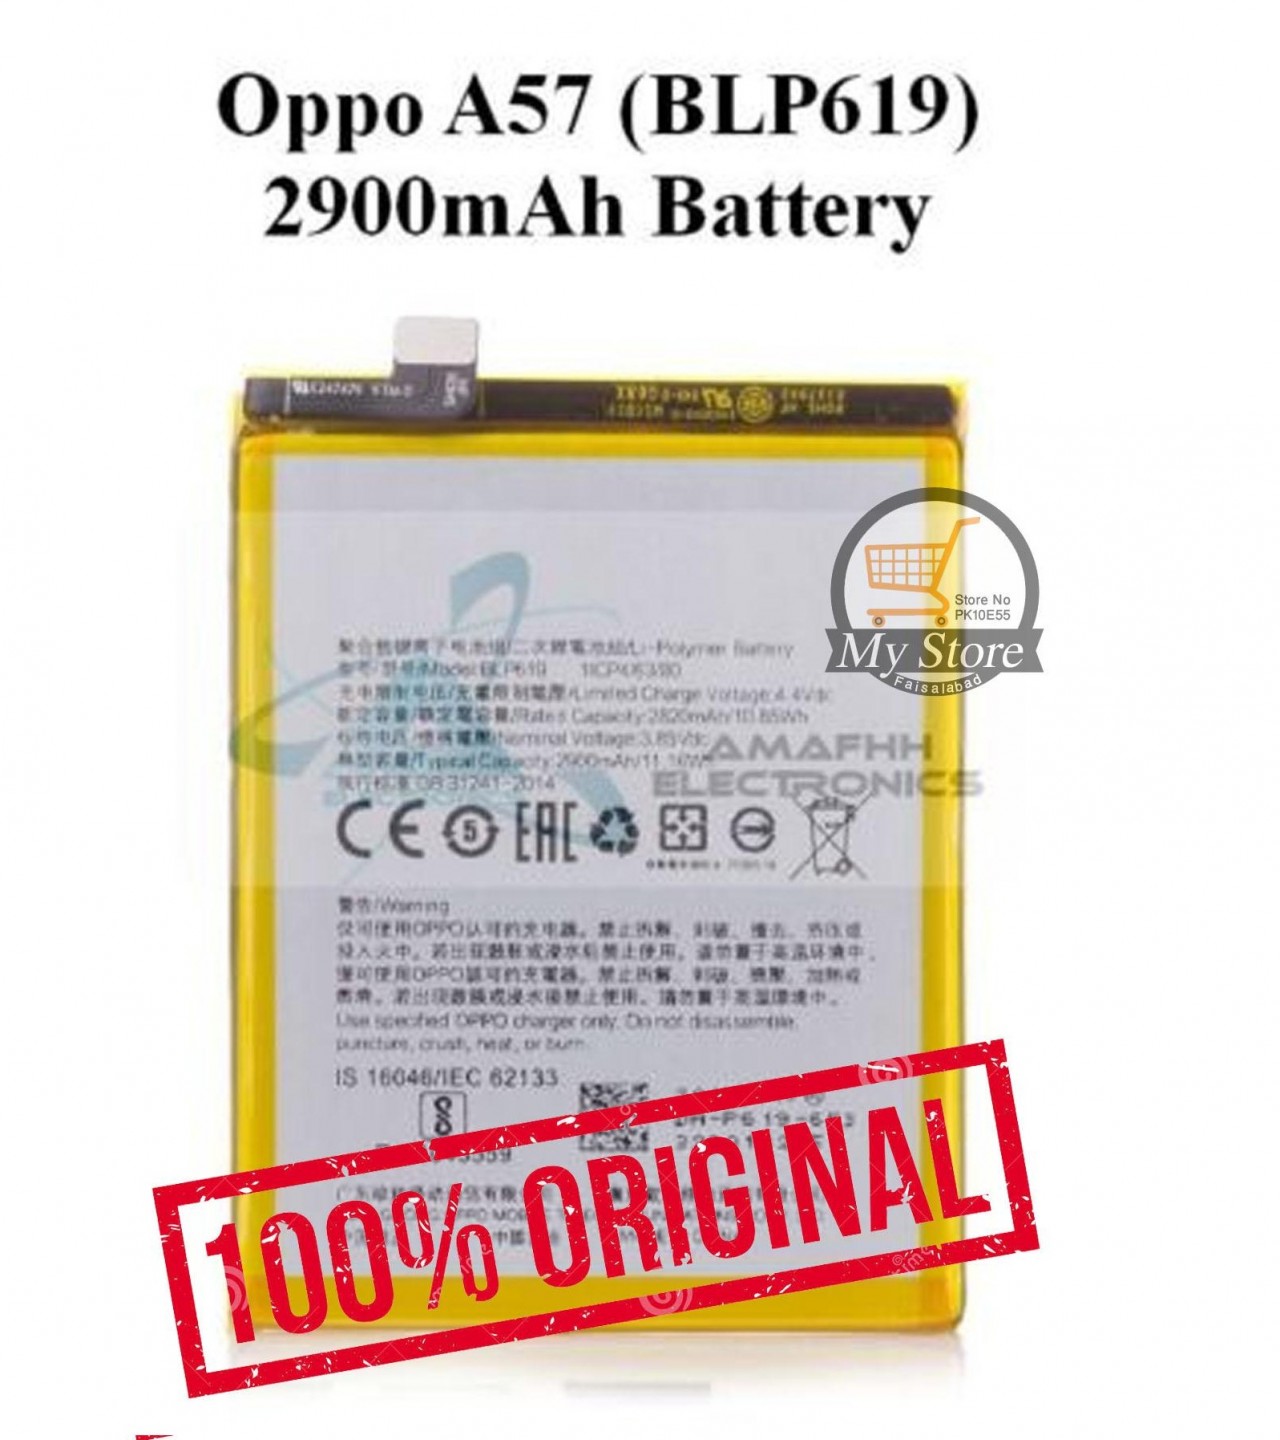 Oppo A57 Battery Replacement For BLP619 Battery With 2820mAh Capacity-Silver